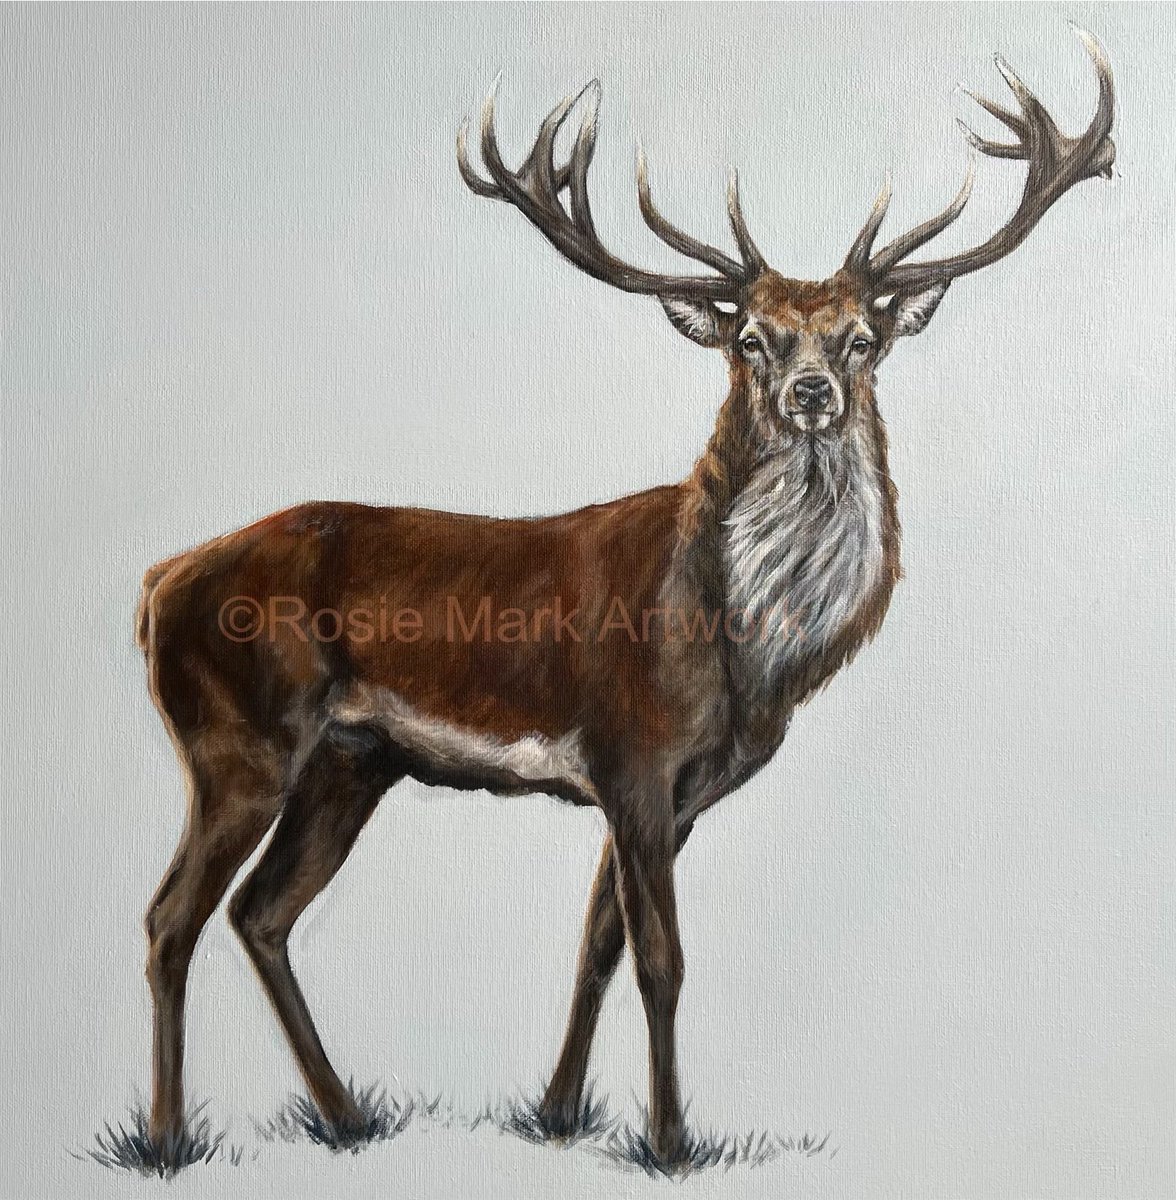 Stag painting 60x60cm commission for a new air bnb in the heart of #Ludlow #stag #commission #visitshropshire #deer #wildlifeart #animalart #forest #woodland @LetsGoLudlow @airbnb #wallart 🦌